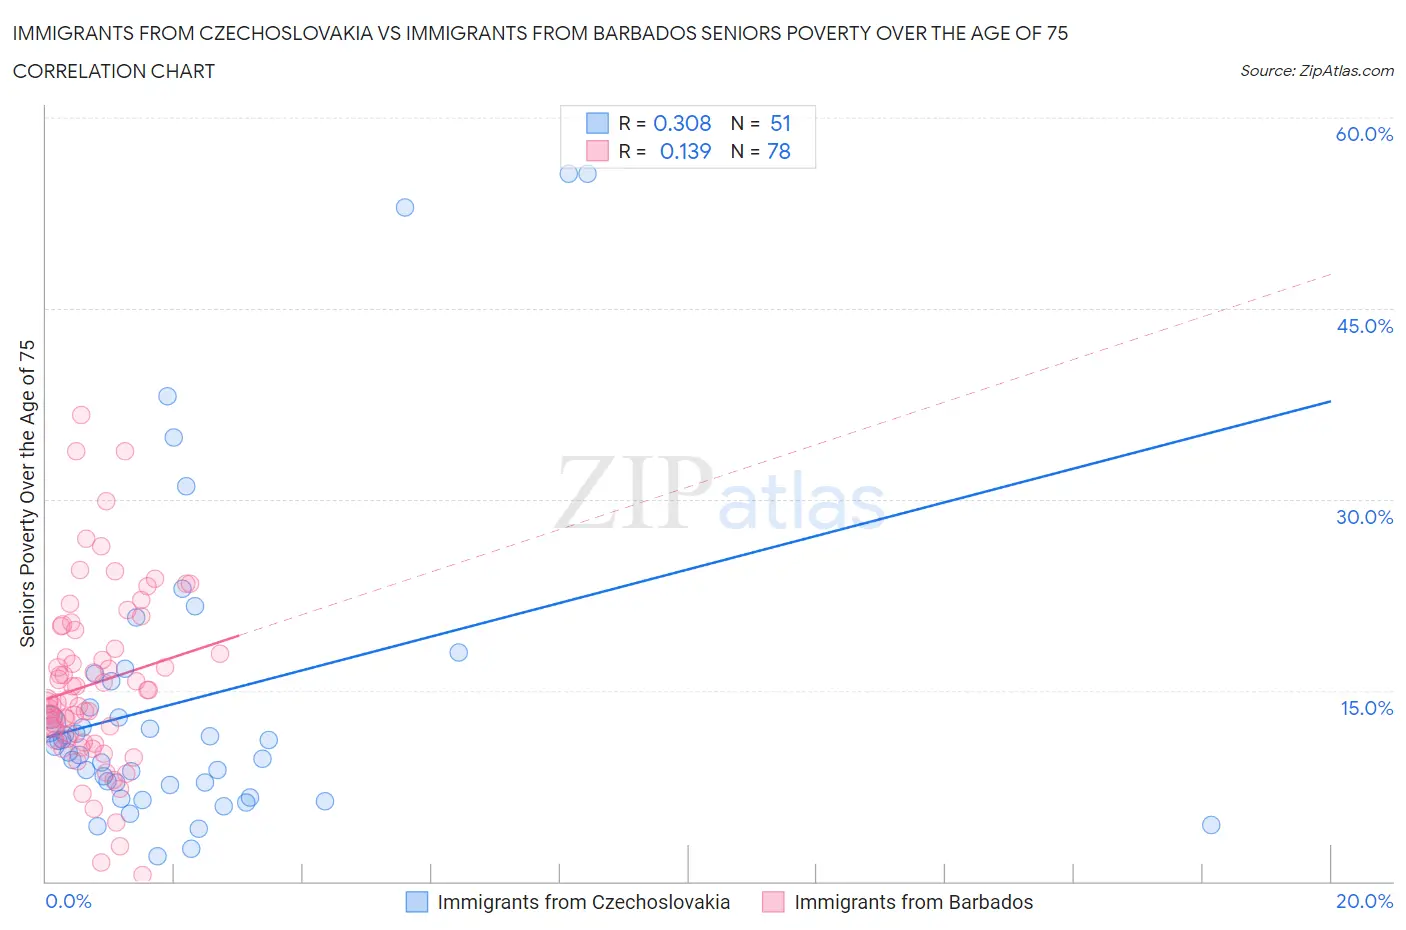 Immigrants from Czechoslovakia vs Immigrants from Barbados Seniors Poverty Over the Age of 75